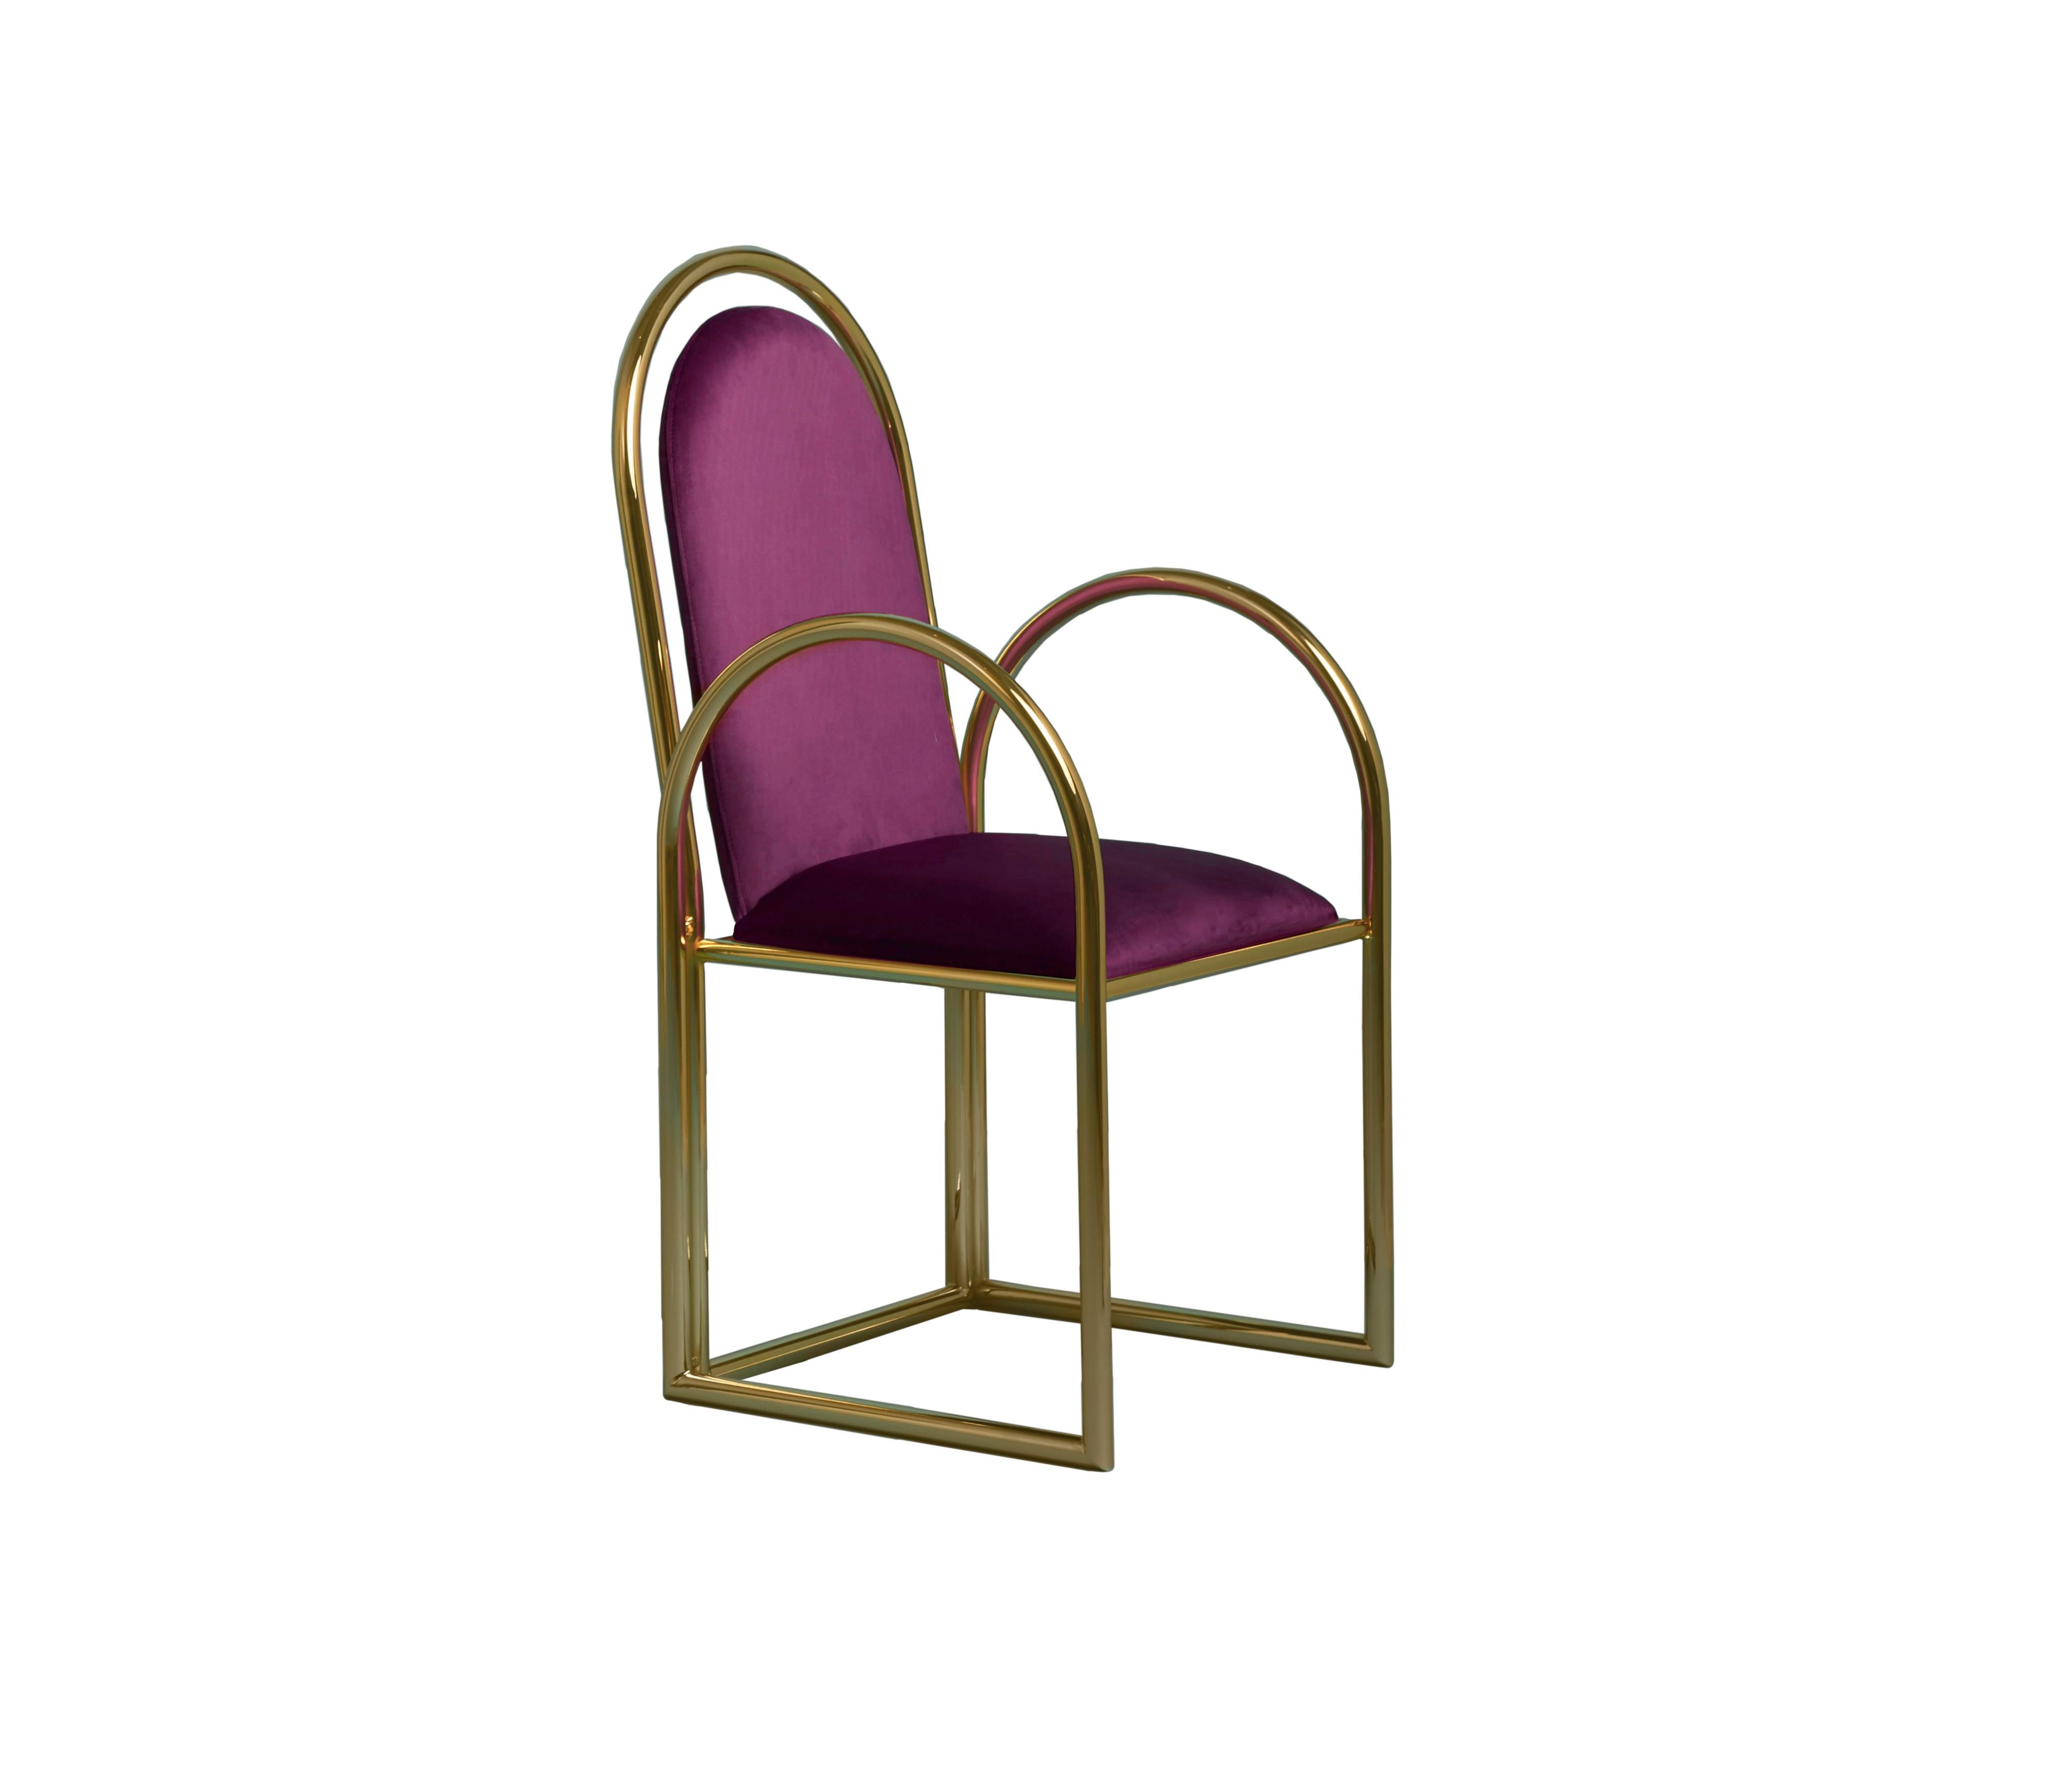 Contemporary Arco Chair by Houtique